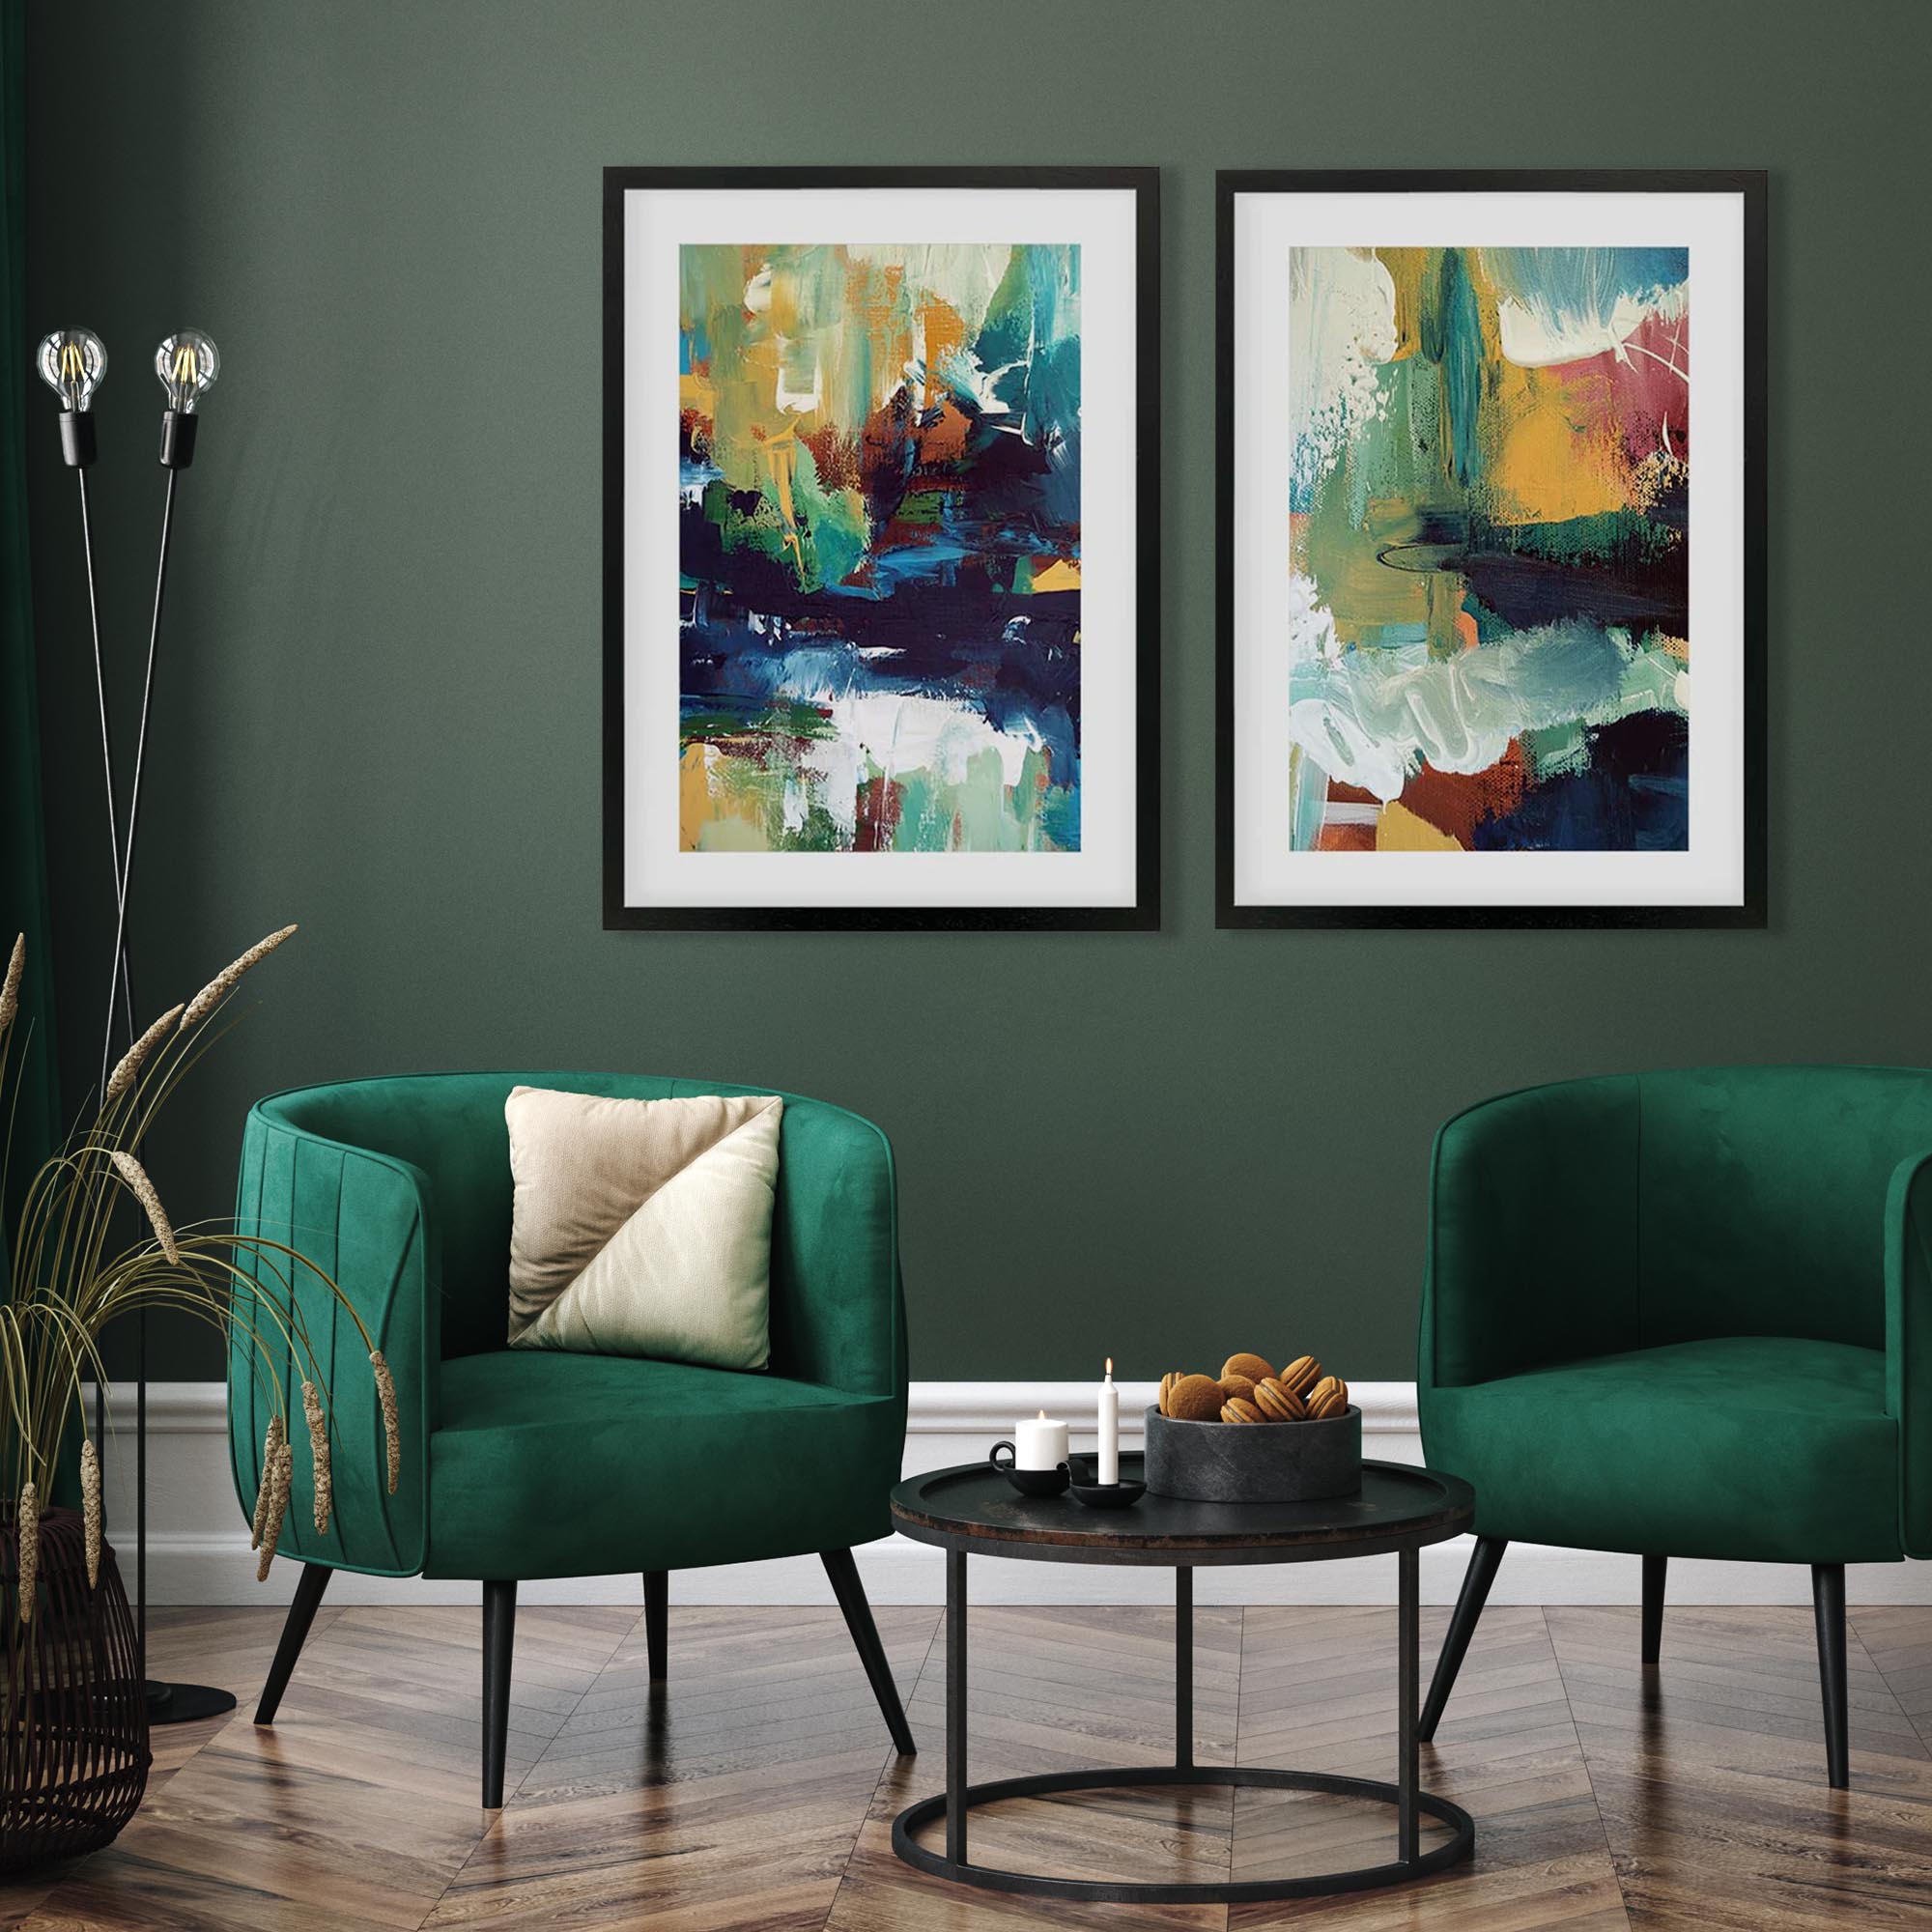 Vibrant Abstracts In Teal And Gold - Print Set Of 2